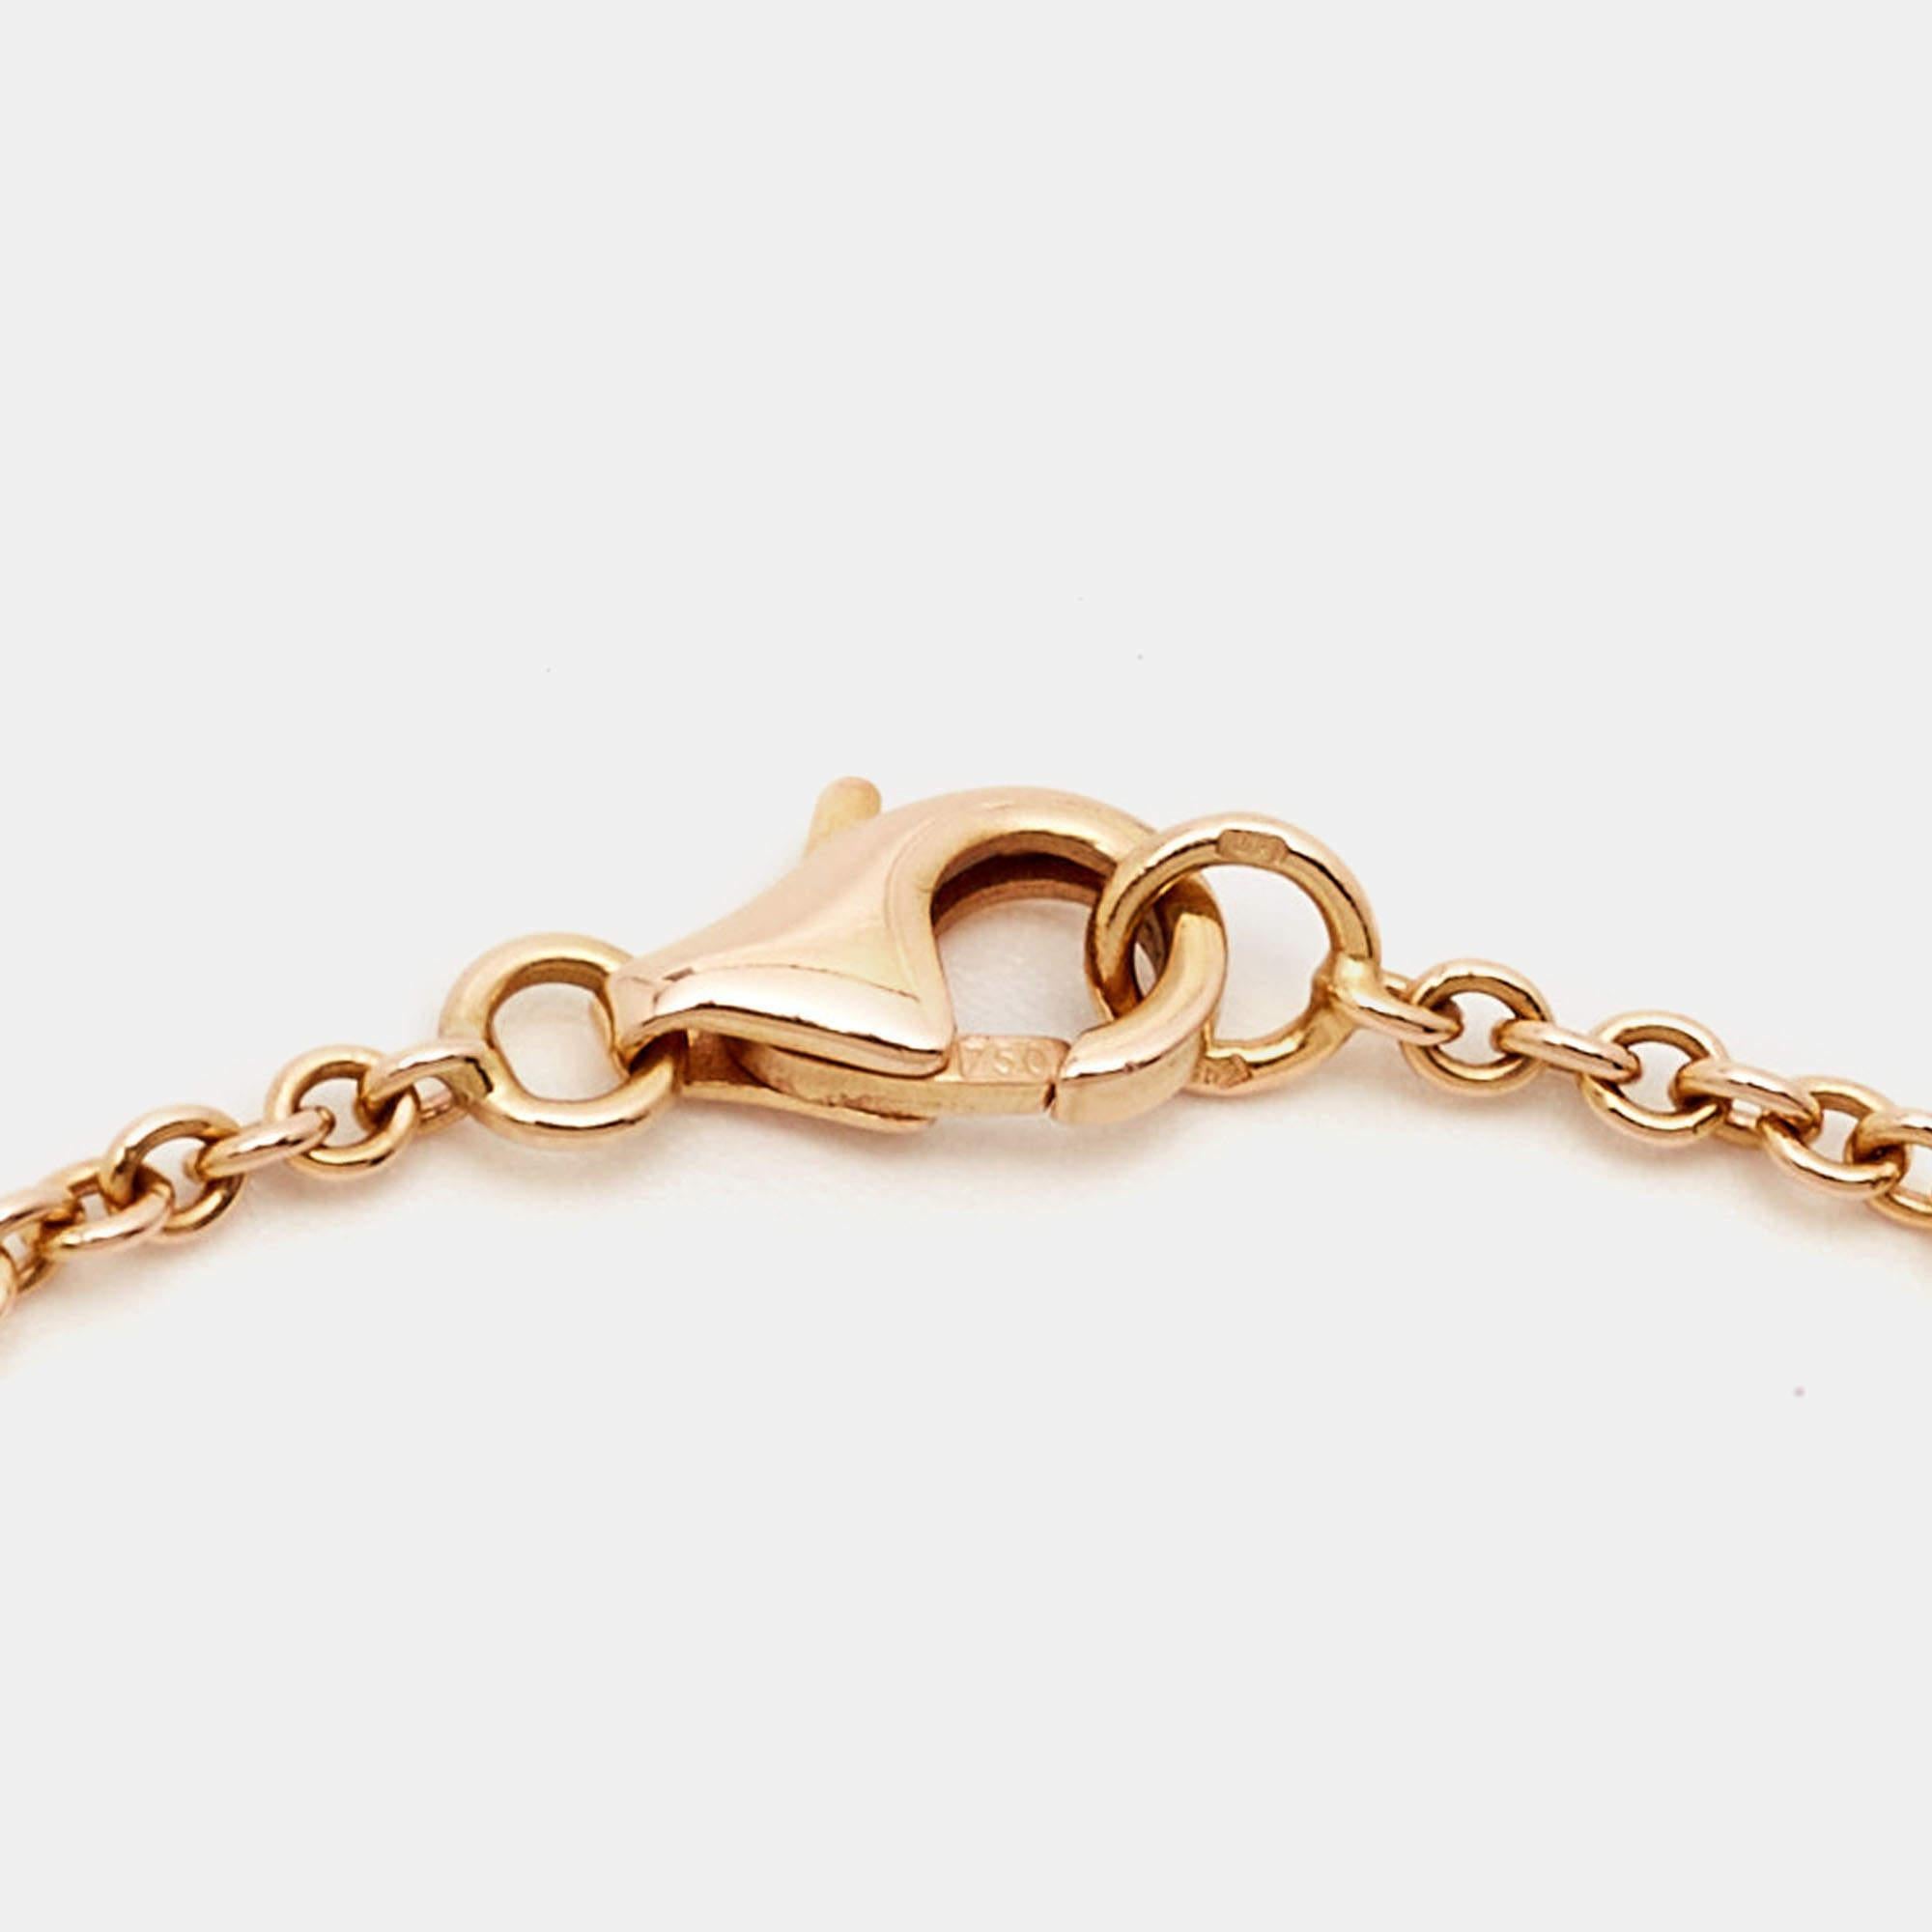 Celebrate timeless love with this bracelet from Cartier's Love collection. It is sculpted from 18k rose gold gold, and the chain holds two magnificent hoops interlocked with one another. Both the rings carry the iconic screw motifs—a signature of